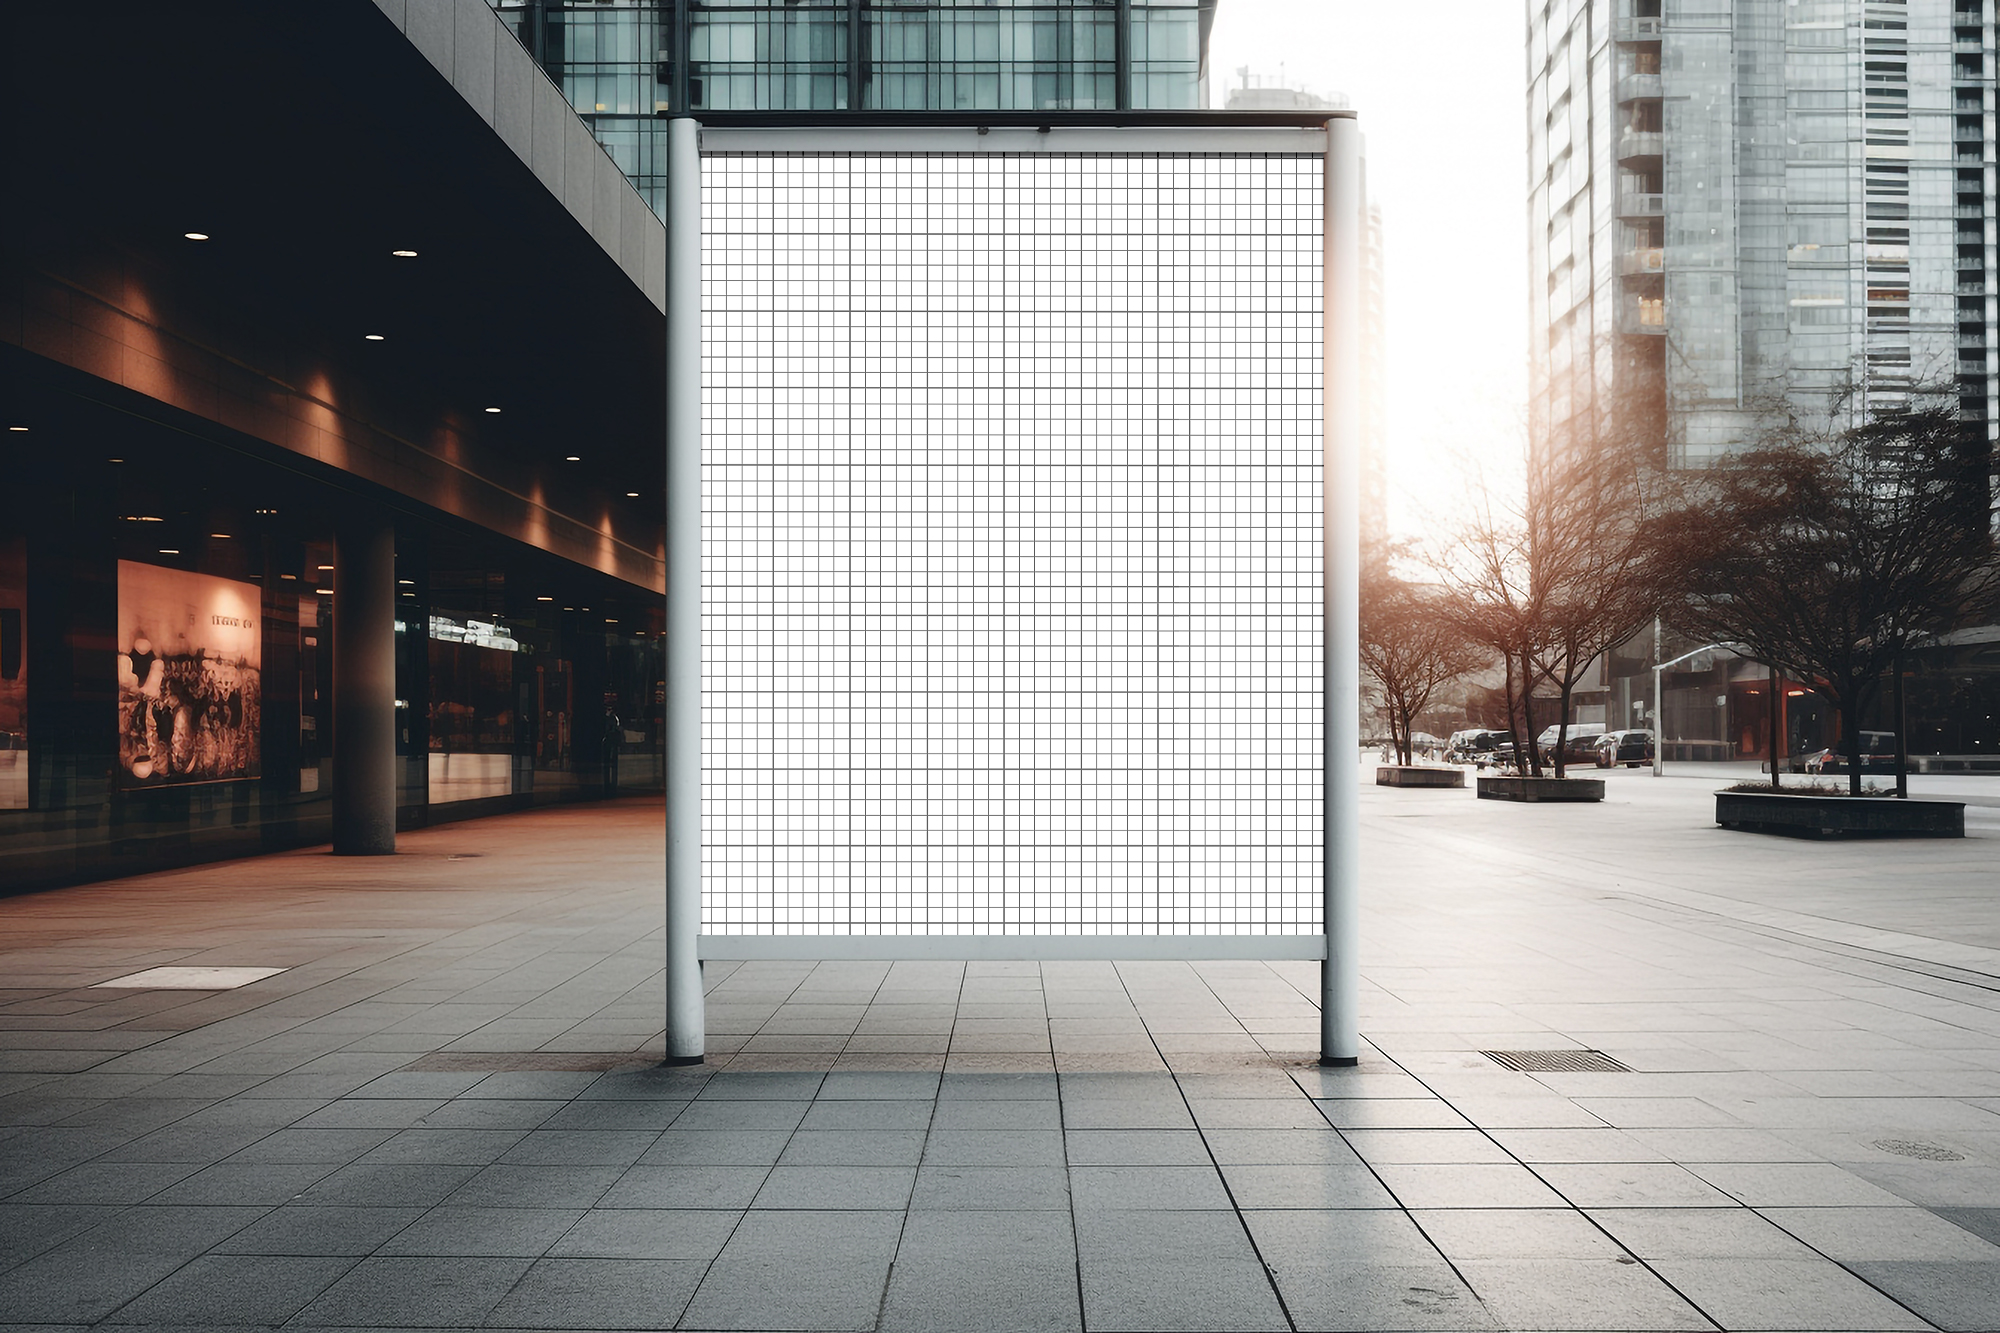 Free Download Outdoor Advertising Street Poster Mockup grid